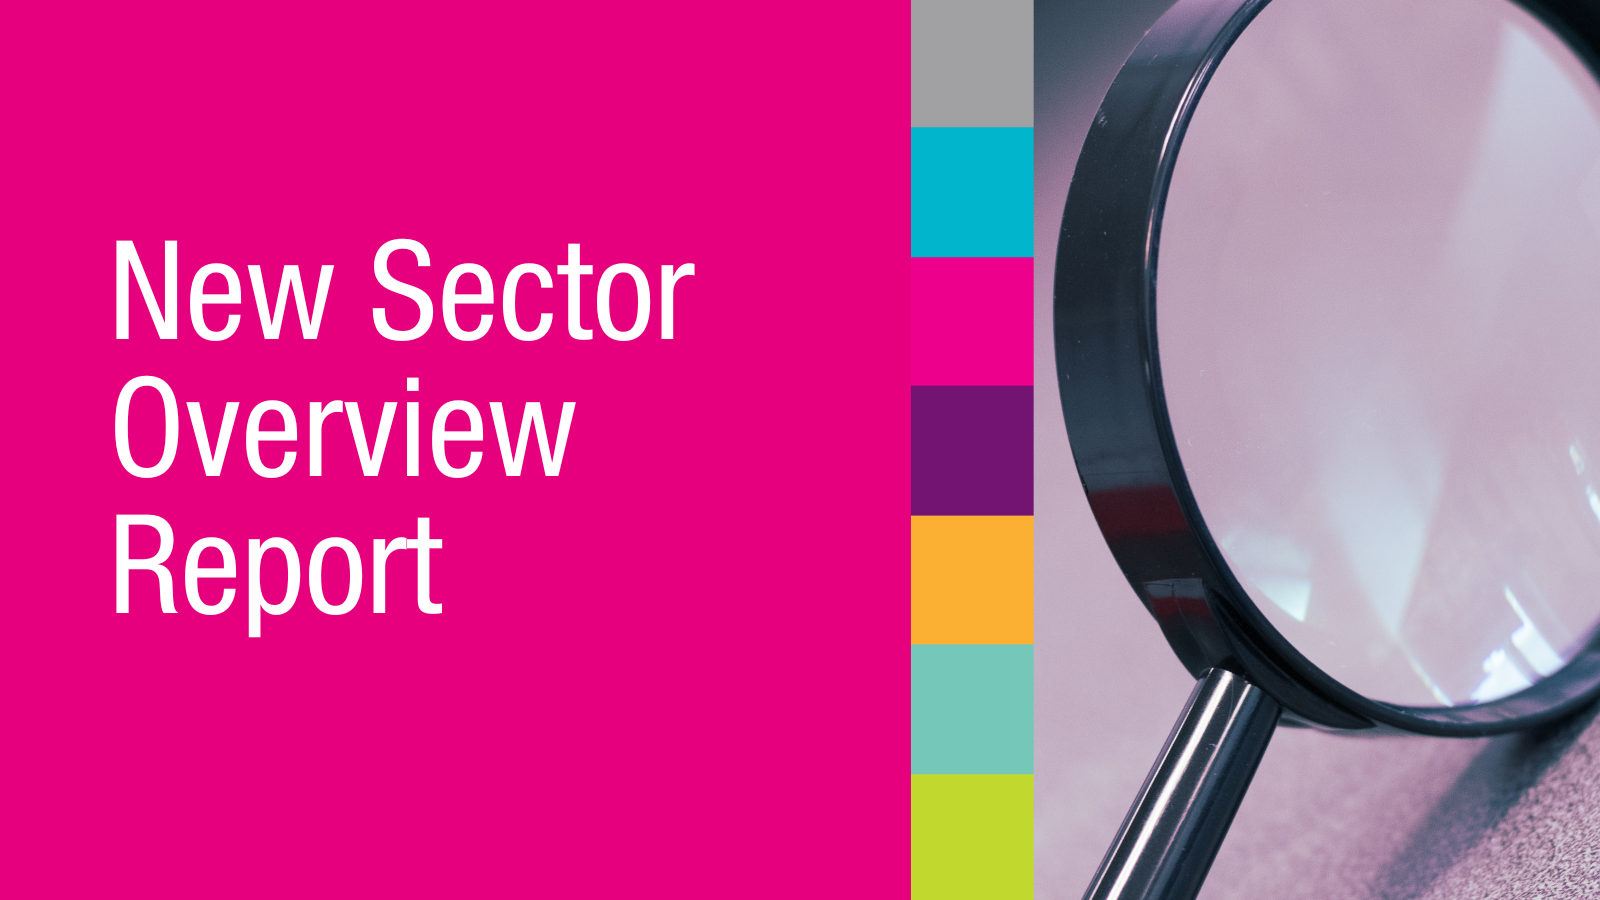 OSCR publishes new Sector Overview Report